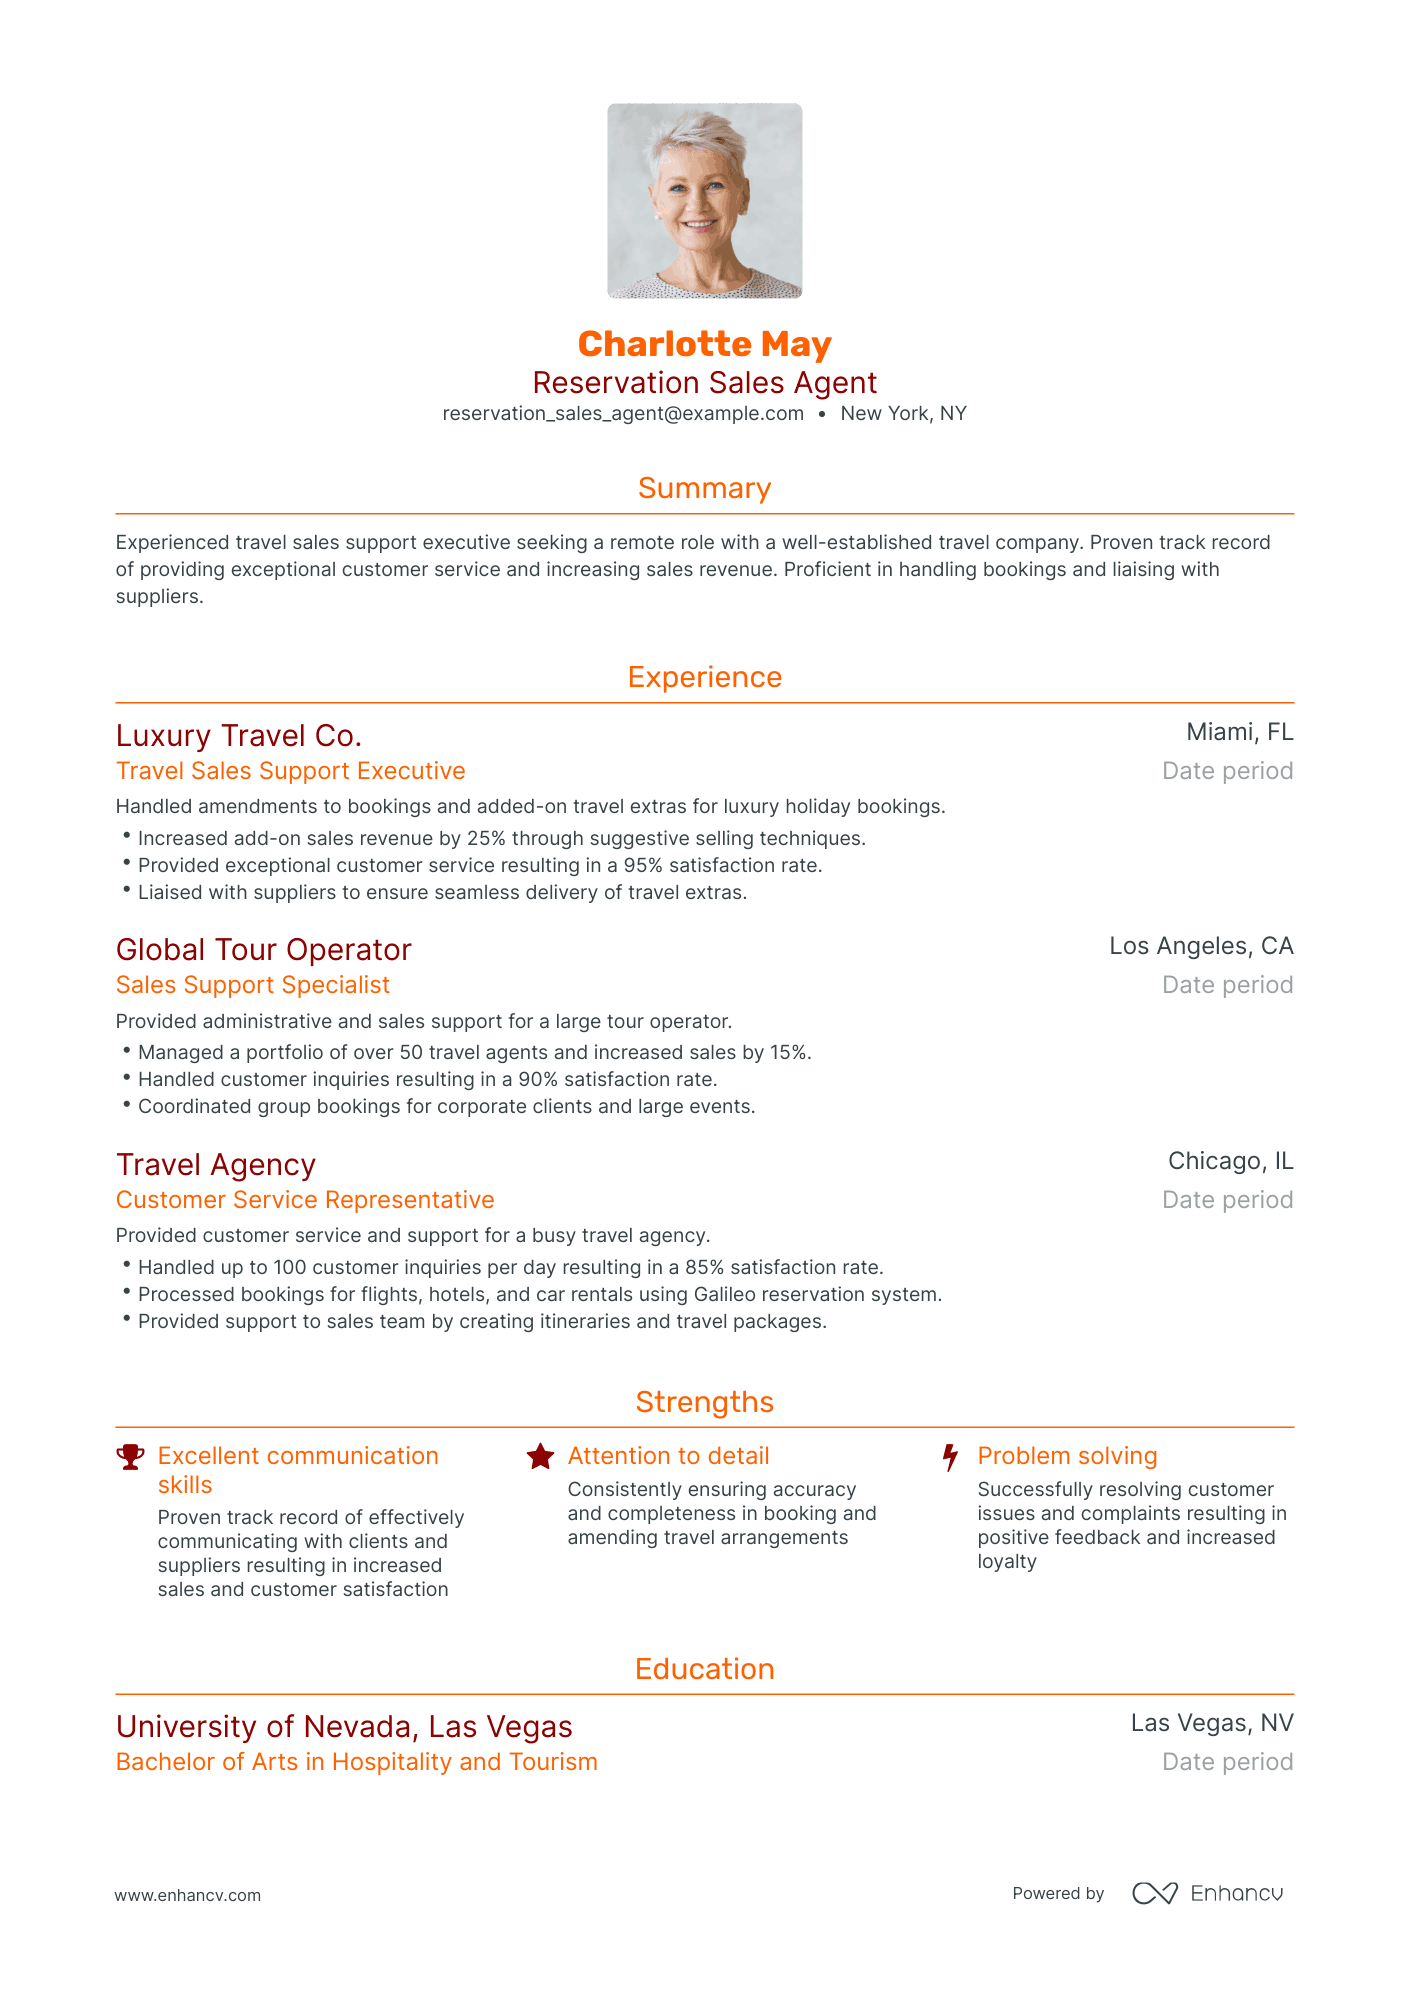 Traditional Reservation Sales Agent Resume Template